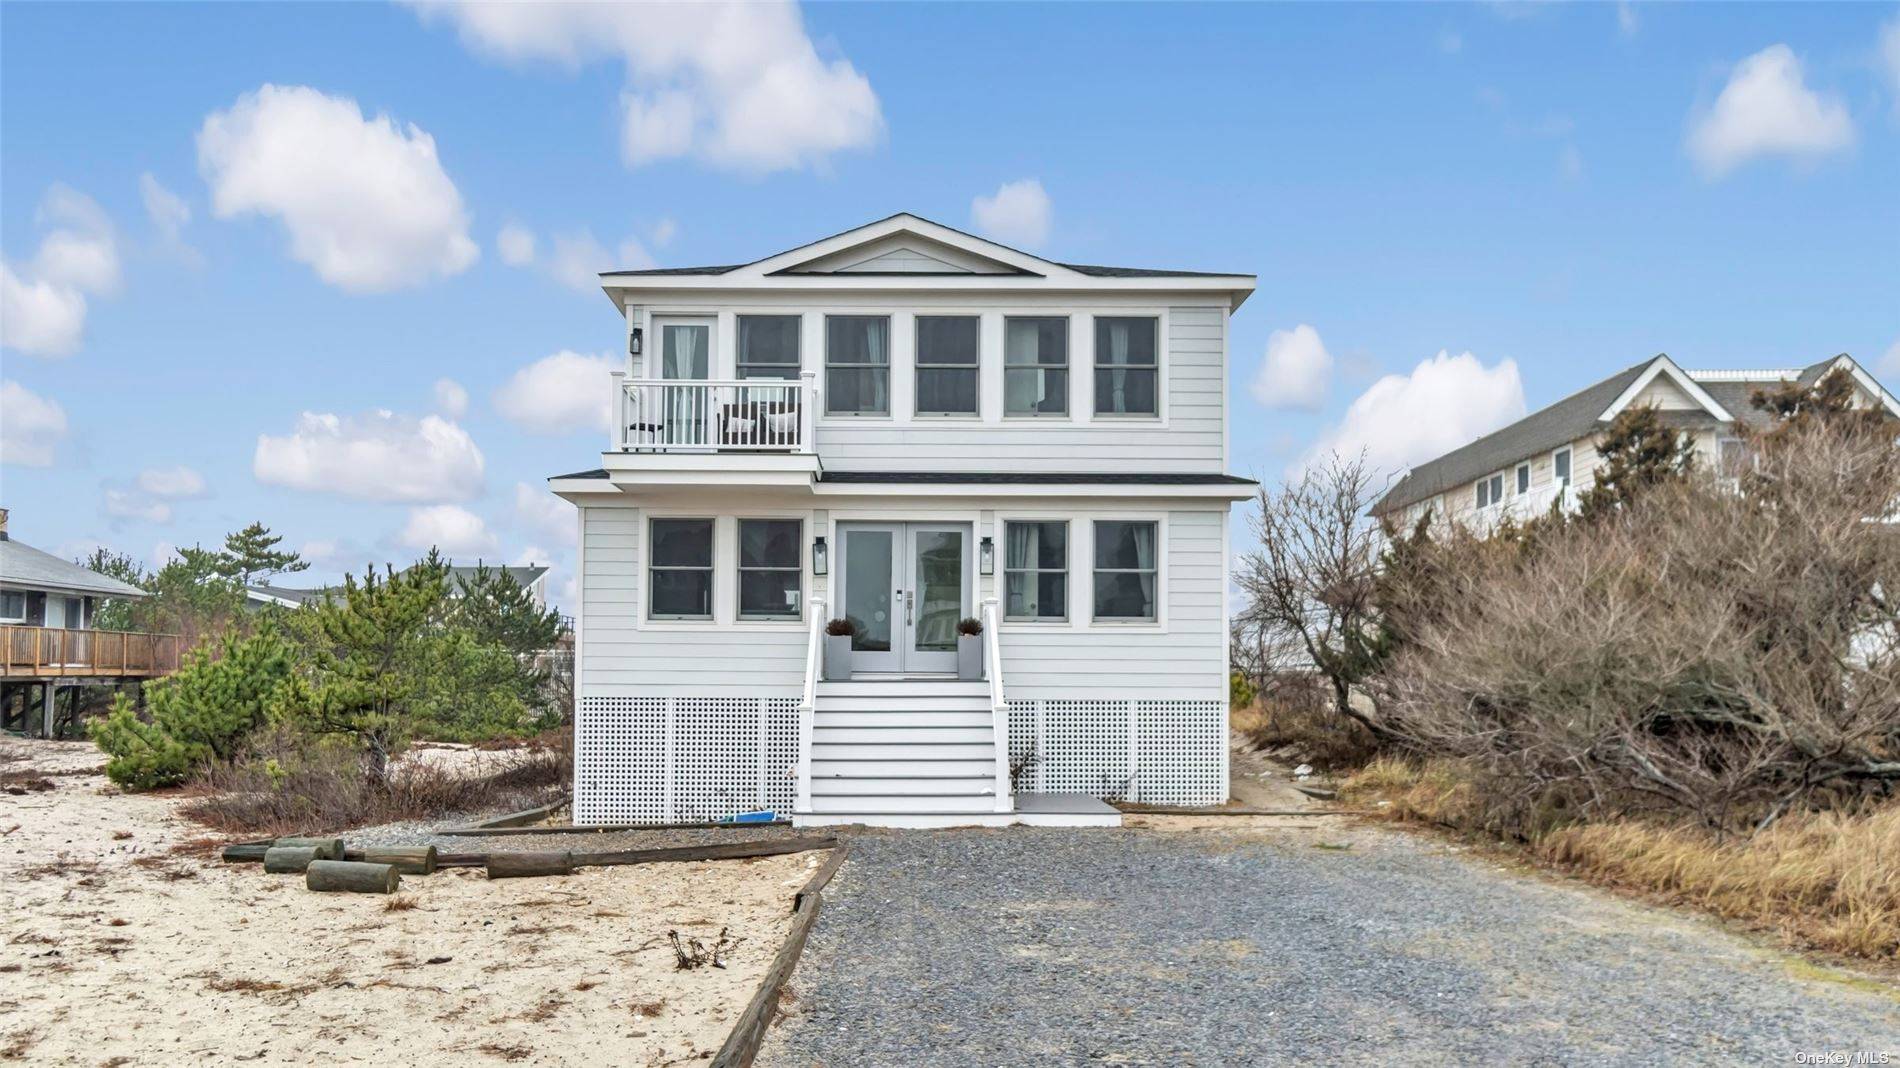 Don't miss this quintessential beach house with a stunning new renovation.